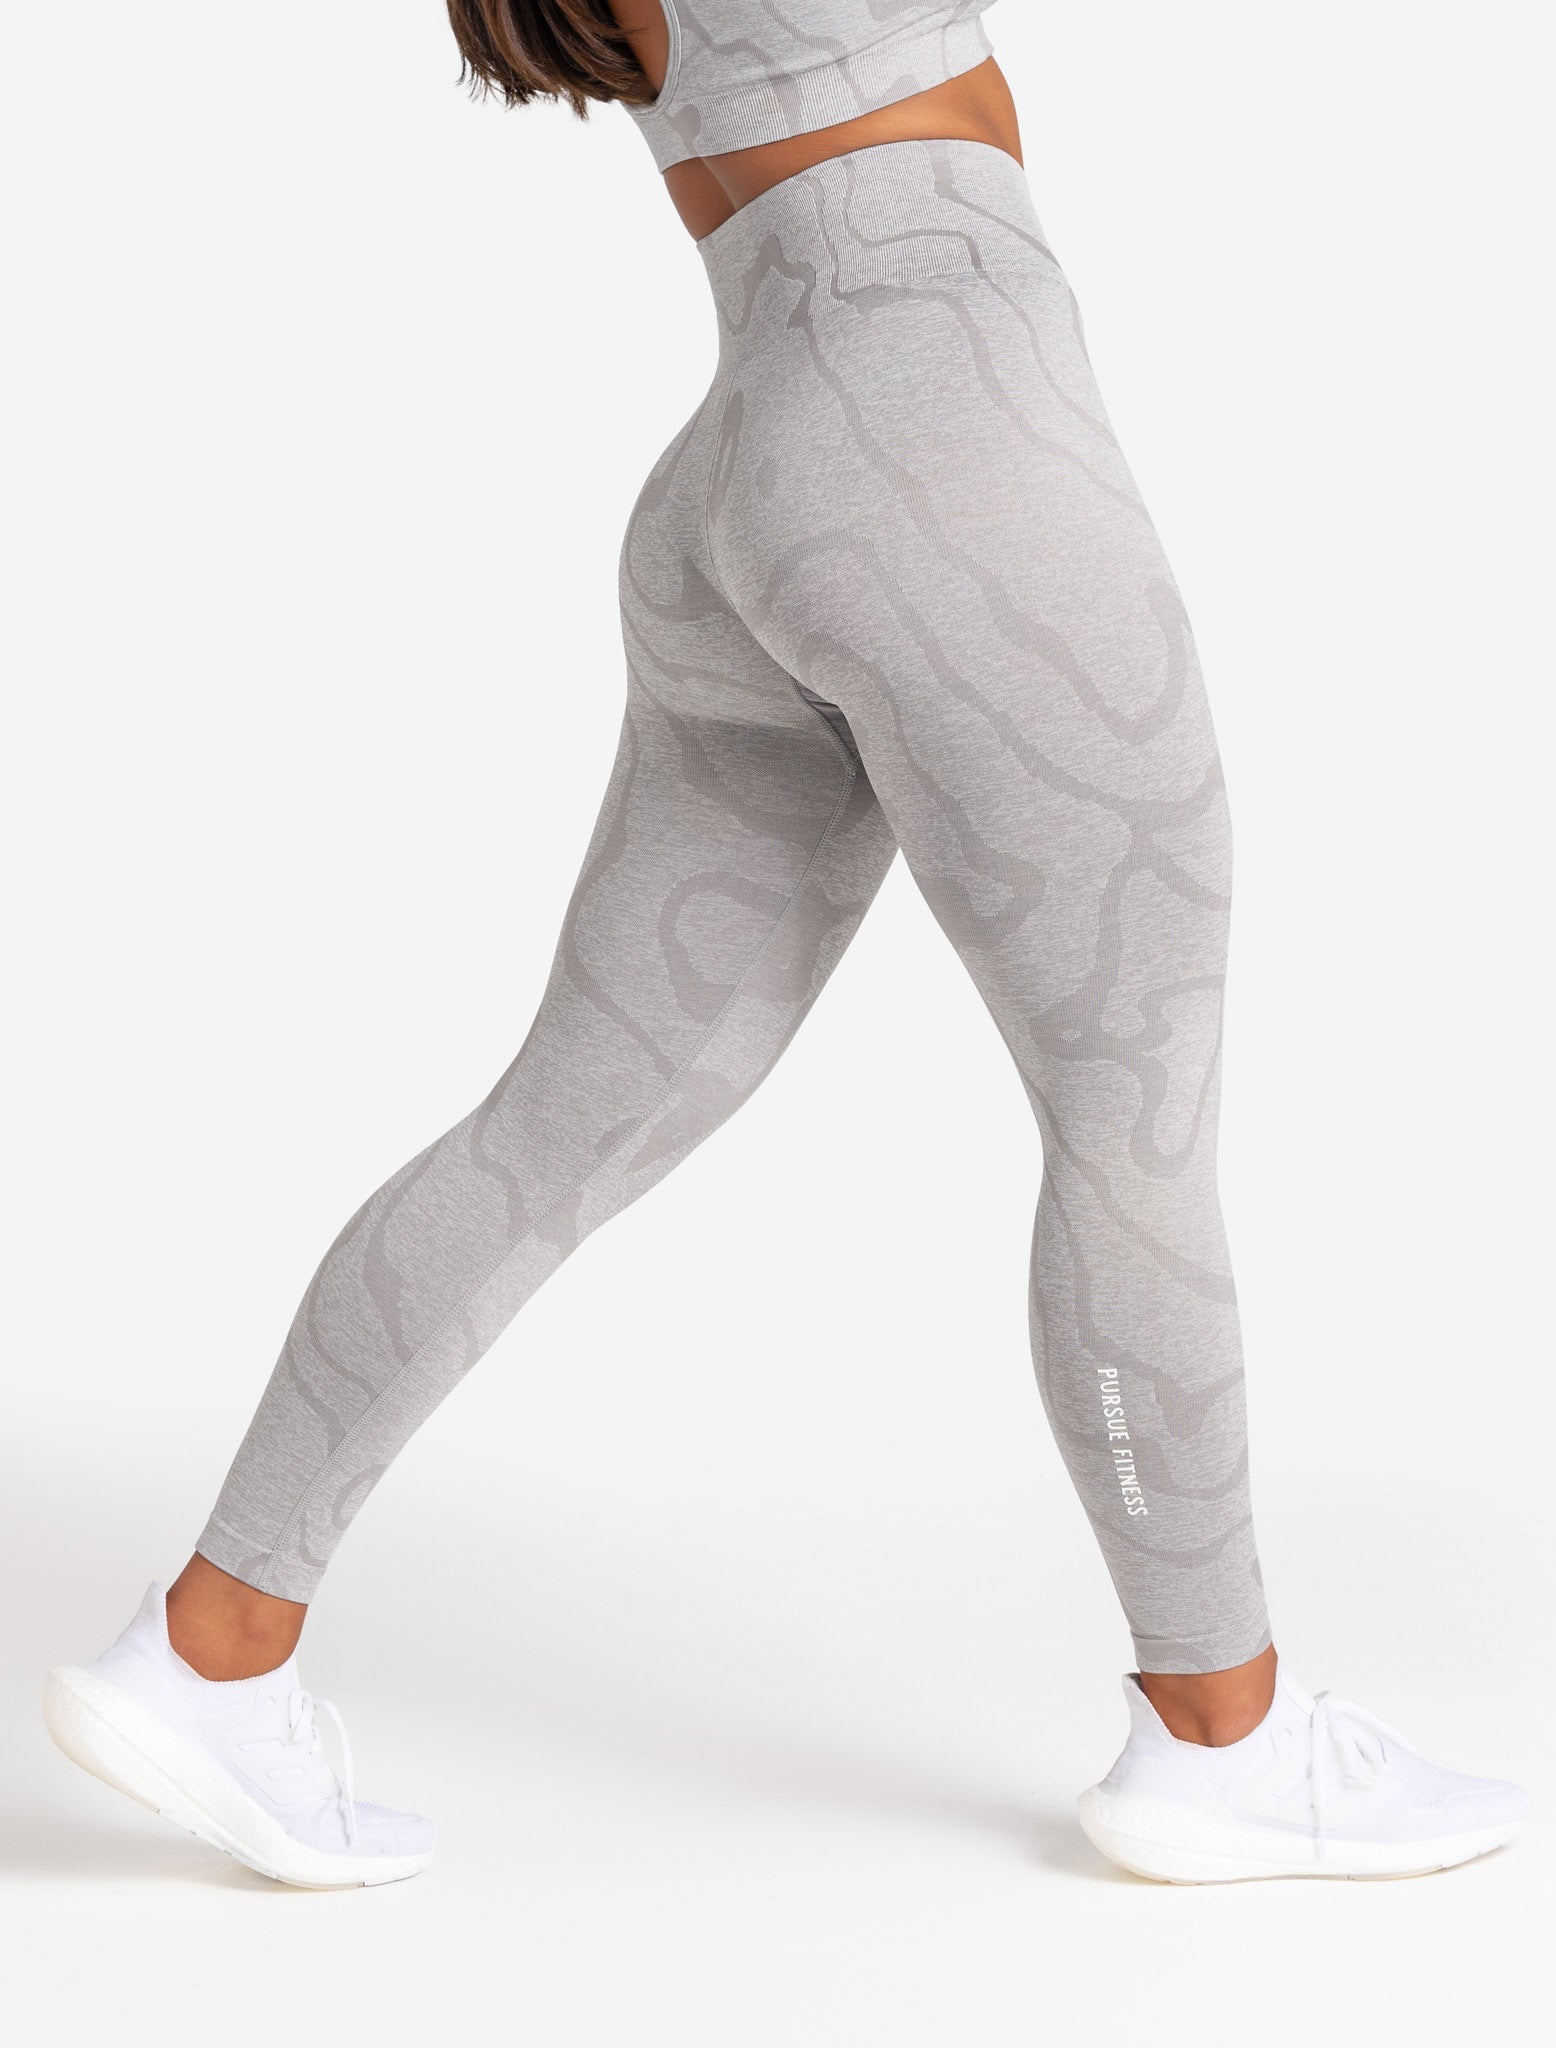 Women's Grey Frequency Go-To Legging by Pact Apparel - Work Well Daily